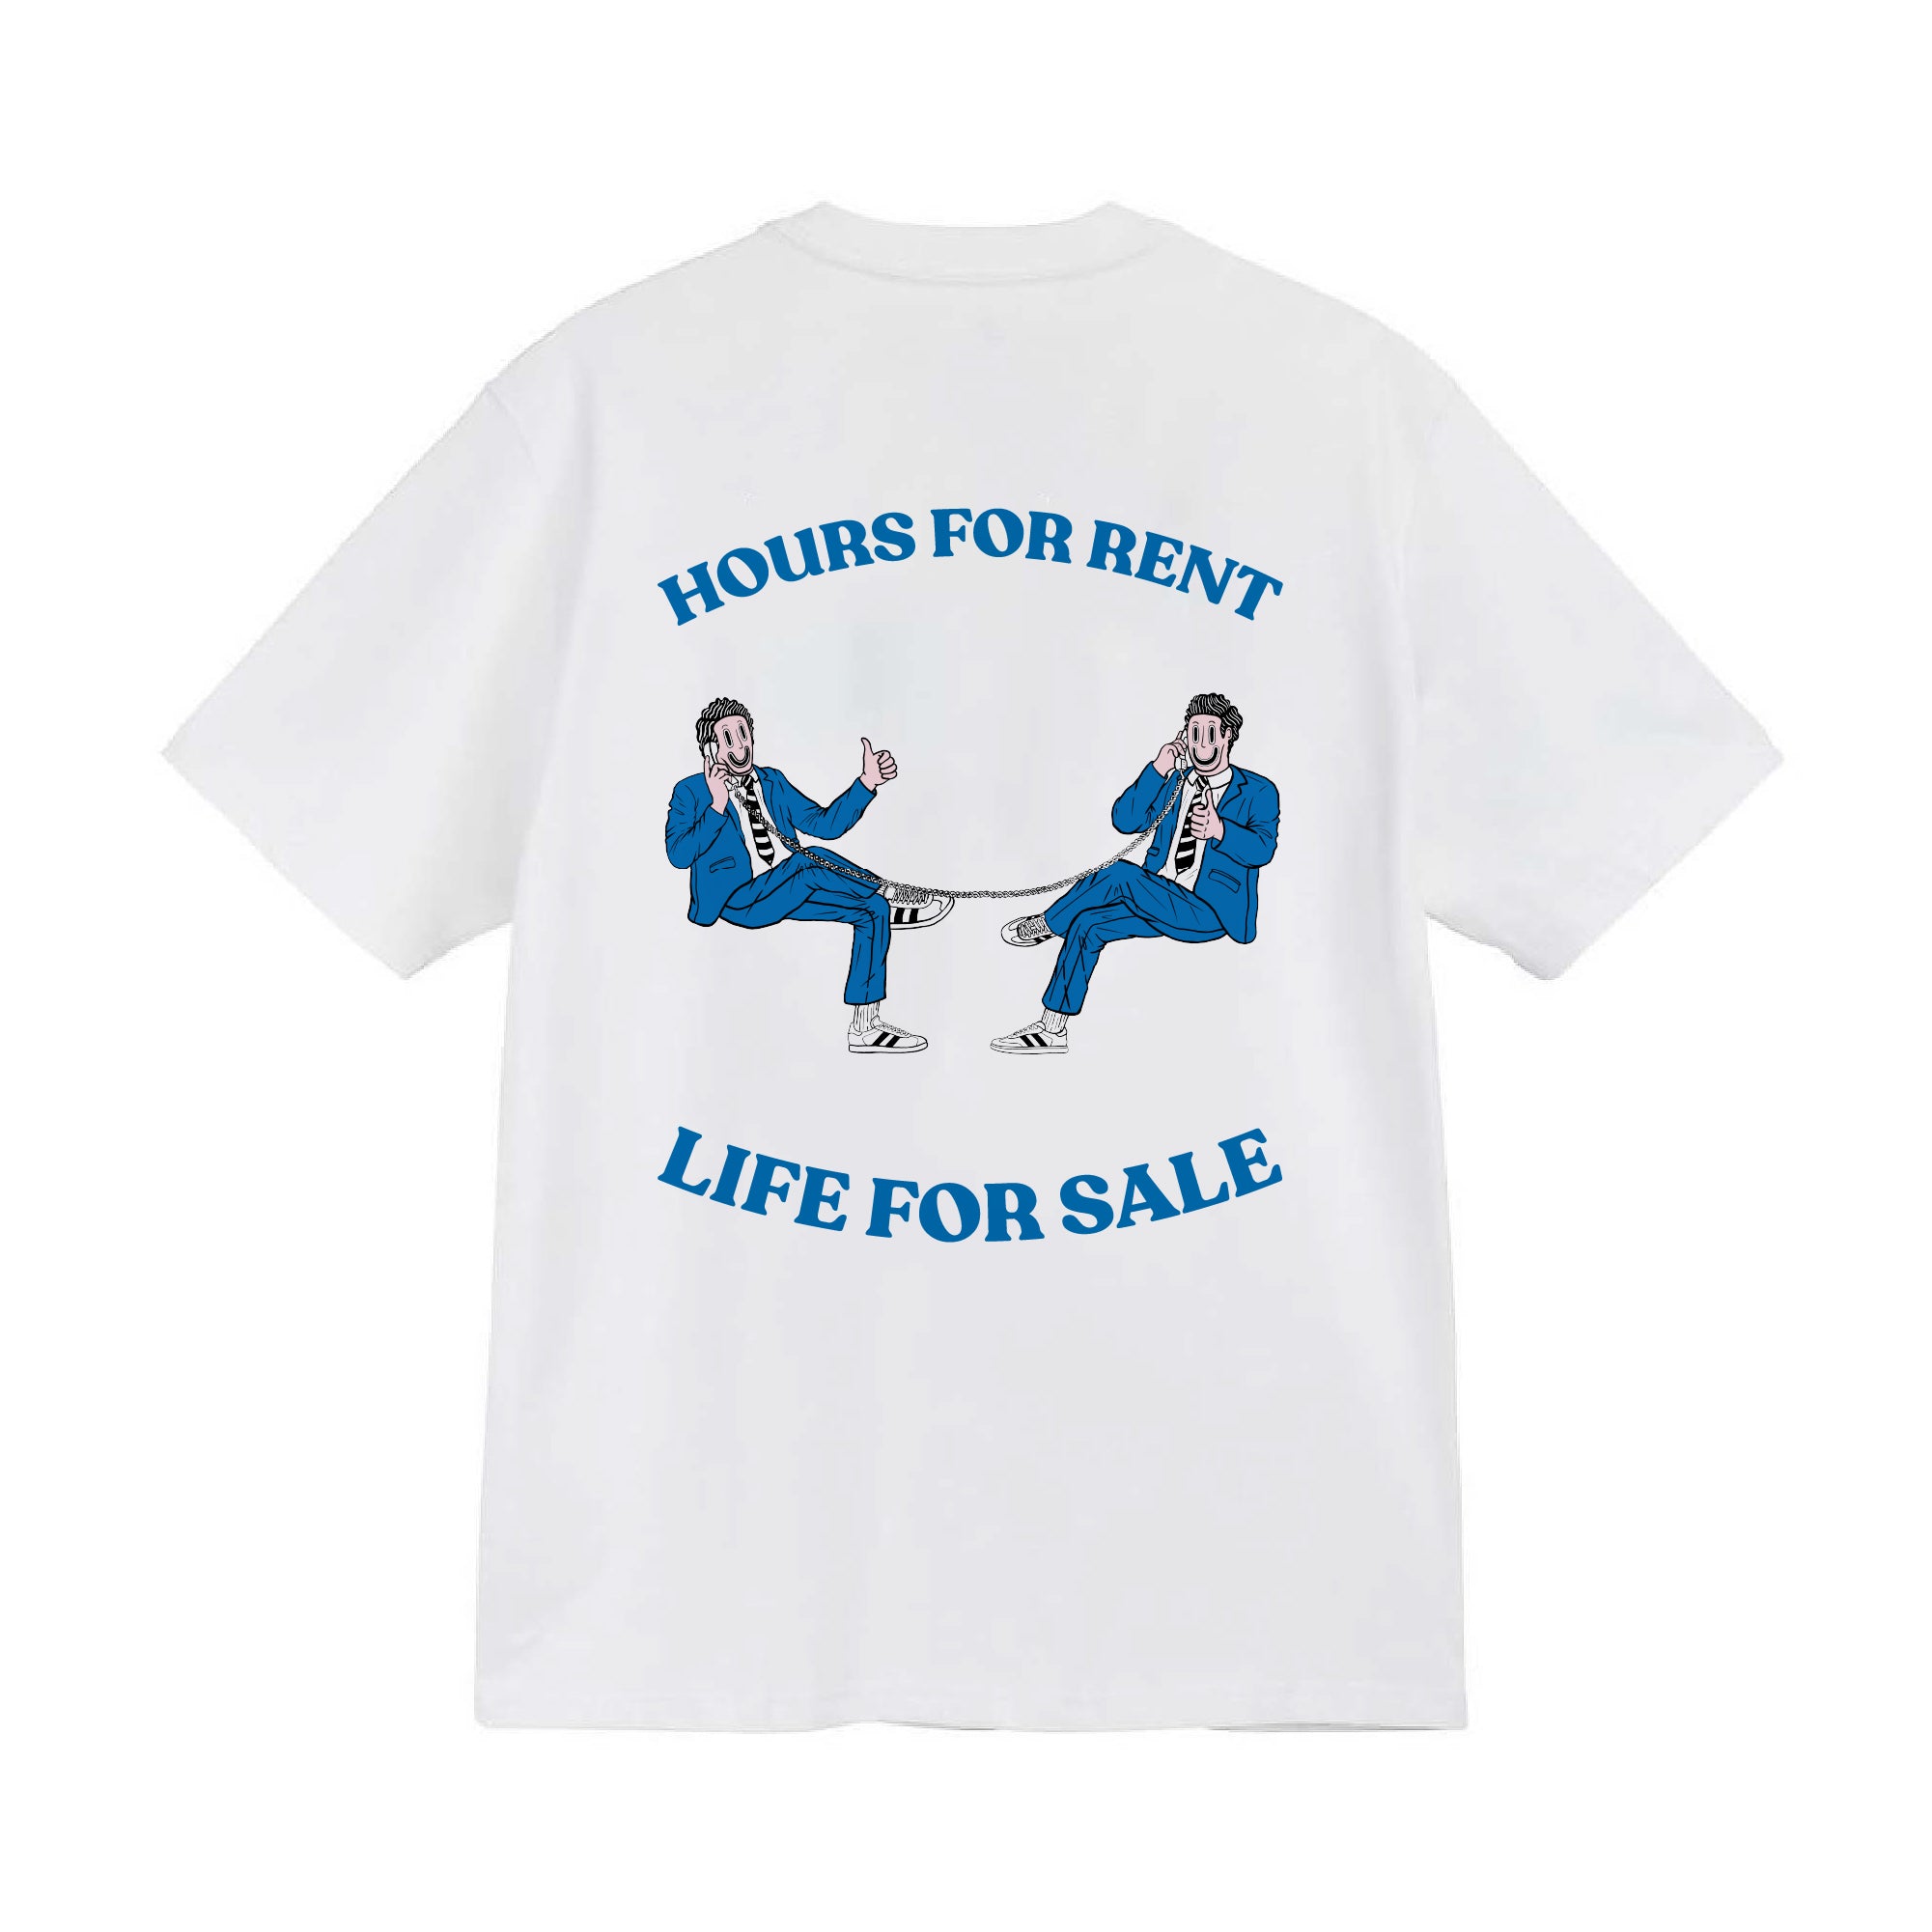 Lives T-Shirts for Sale